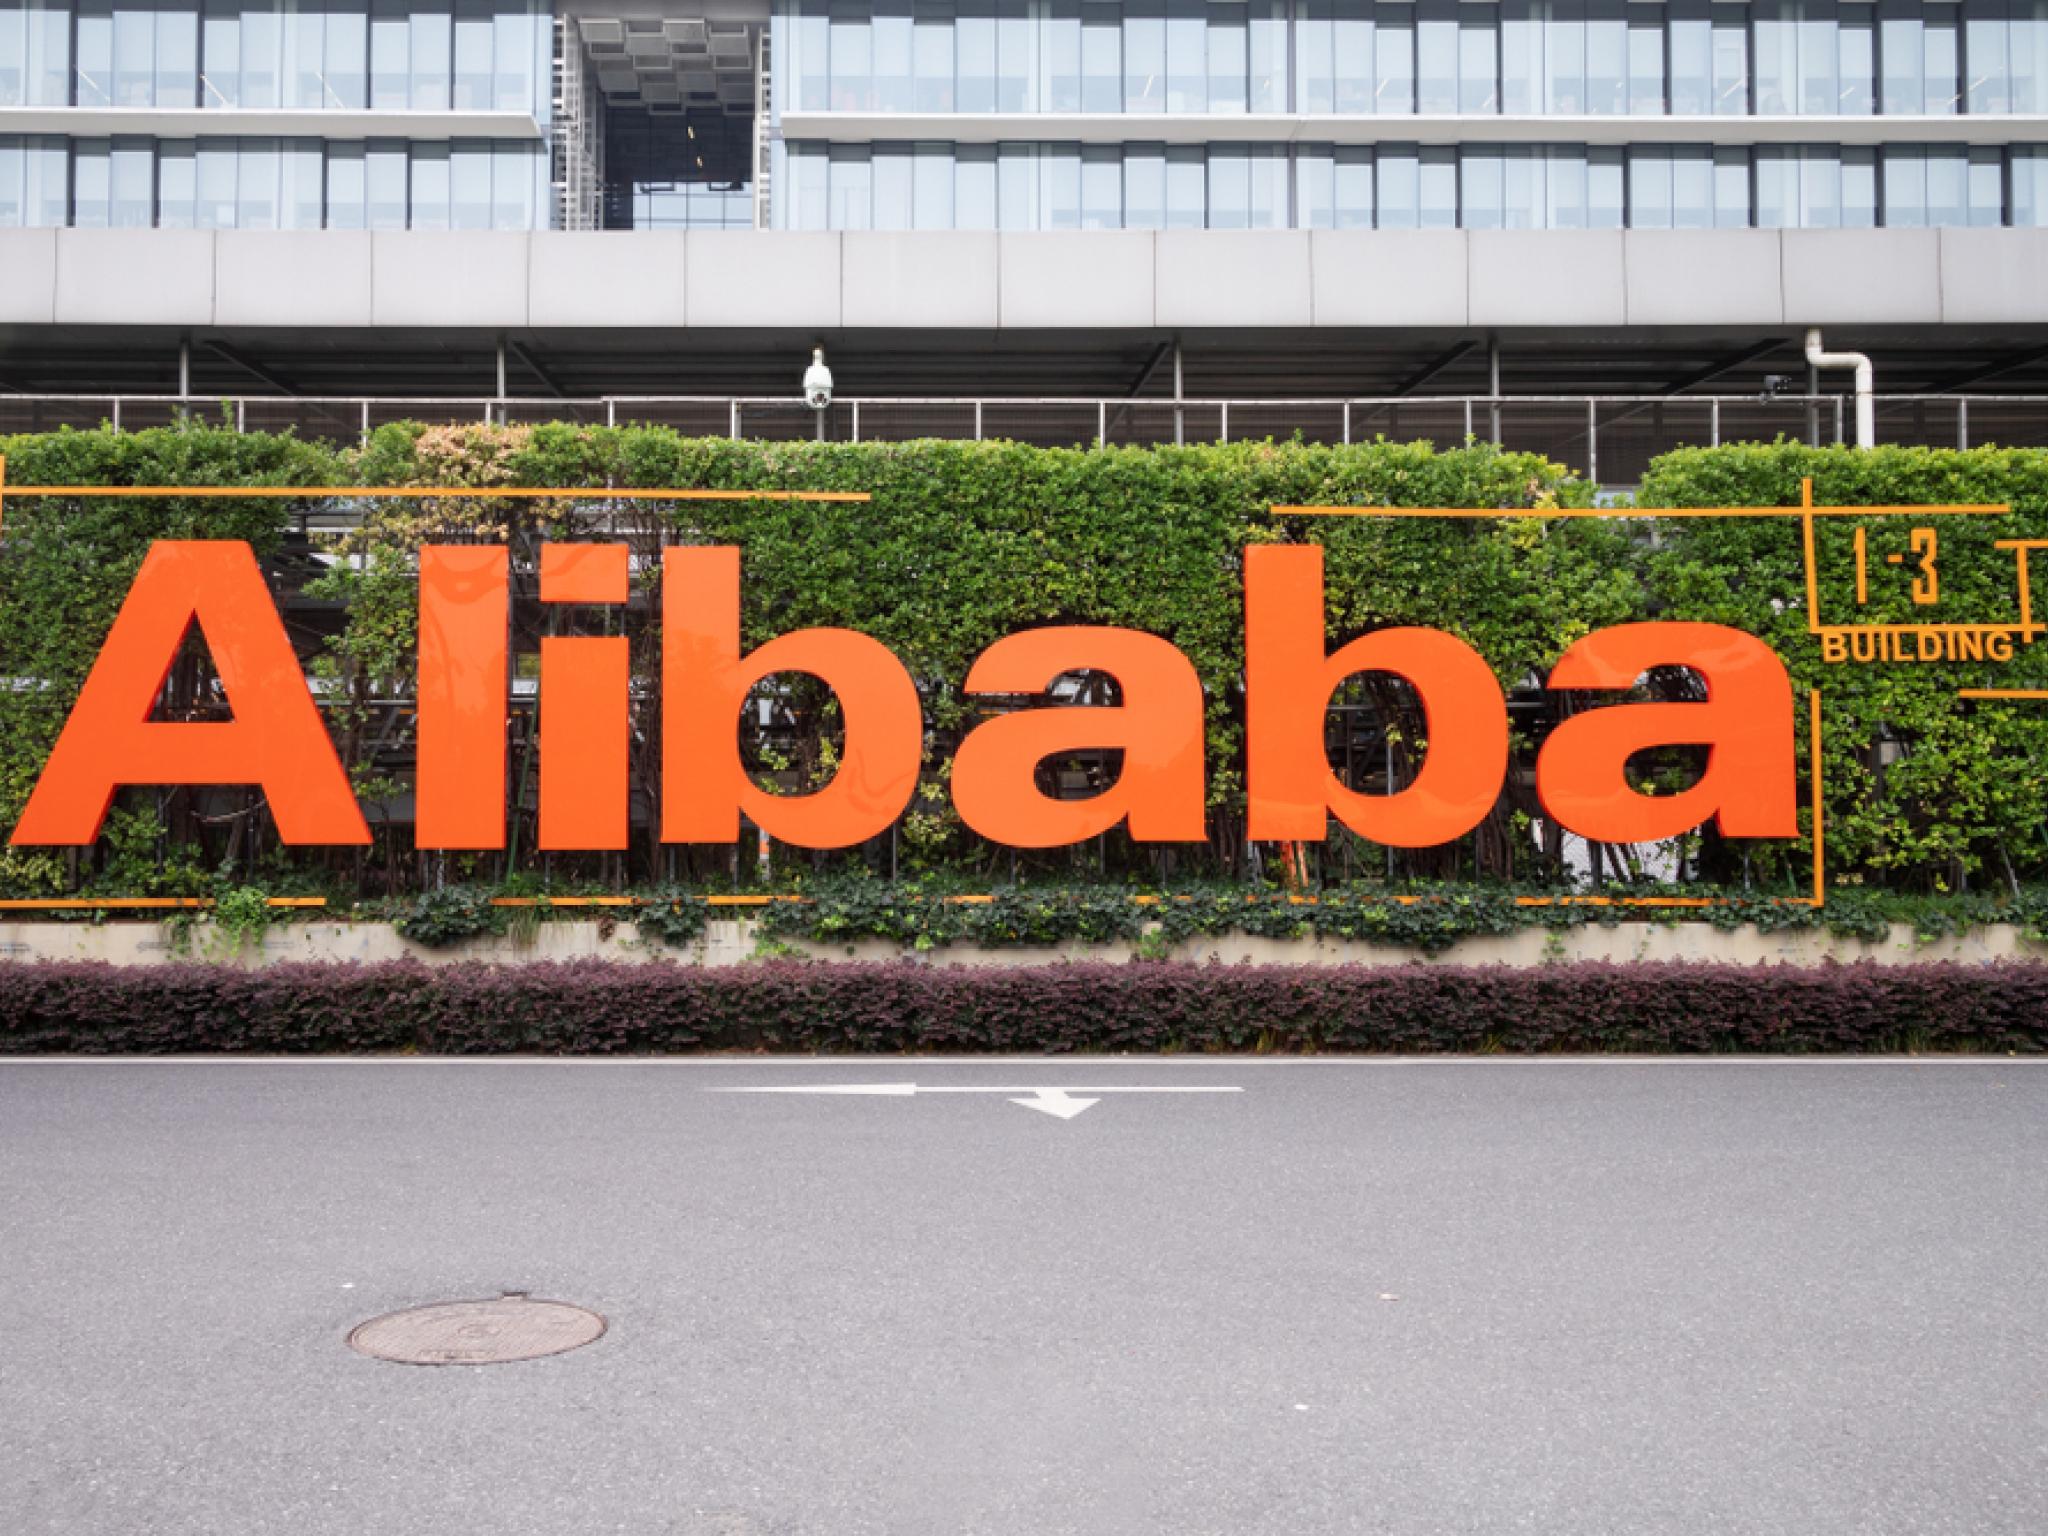  alibaba-to-rally-over-13-here-are-10-top-analyst-forecasts-for-thursday 